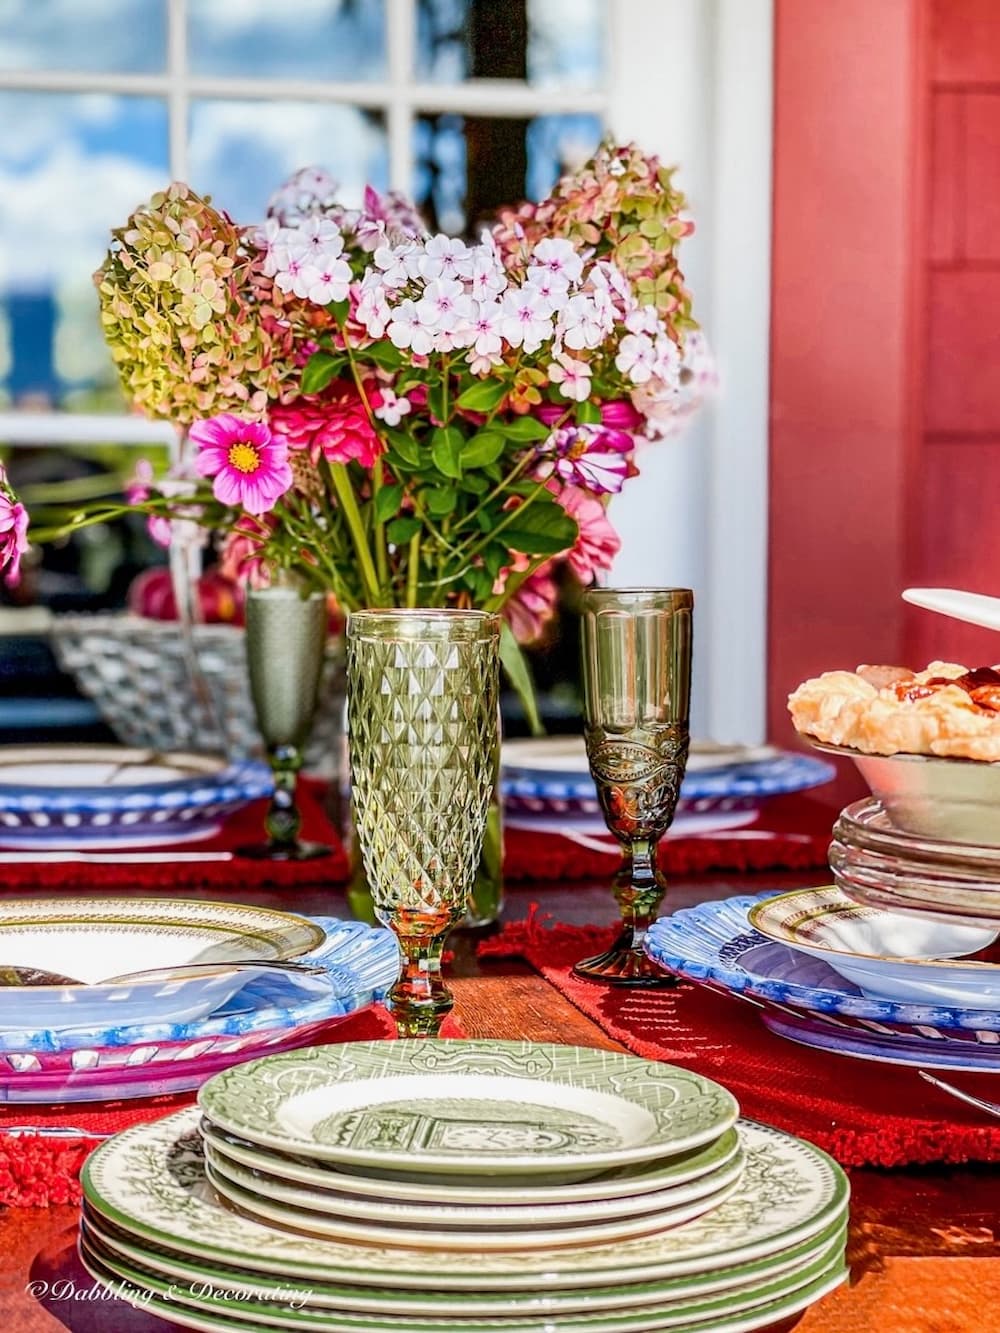 Set the Table with Vintage Autumn Warmth